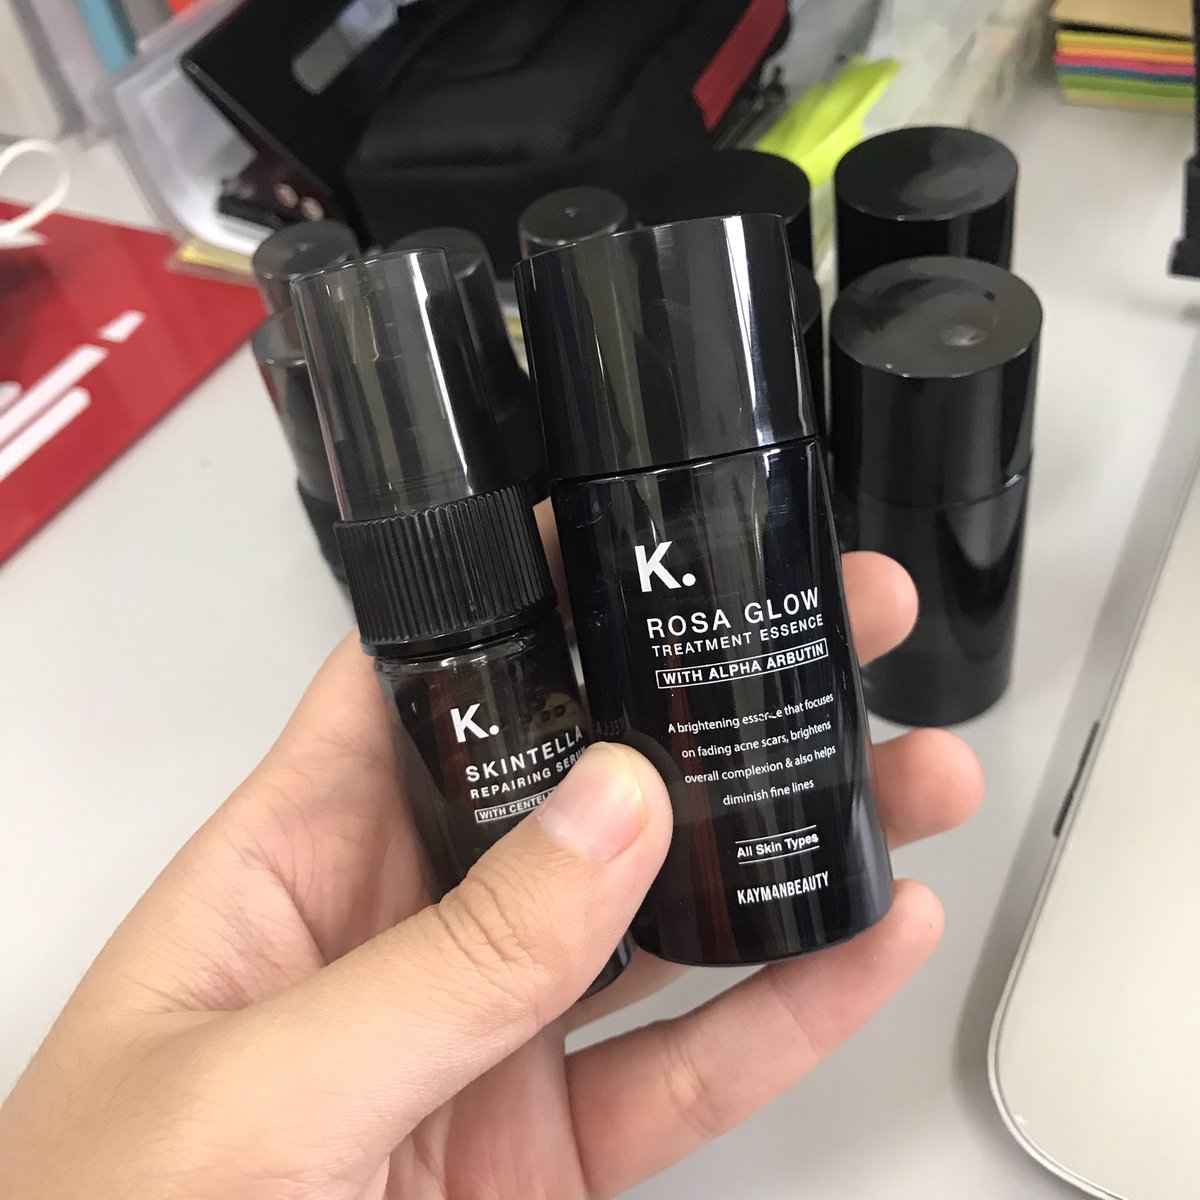 These two sho cute! 🥺

Skintella & Rosaglow travel size restock!!

For purchase can click this link belowww 👇🏻
shopee.com.my/product/380690…

@kaymanbeauty @UiiNellnell @NabellaAnuar ❤️